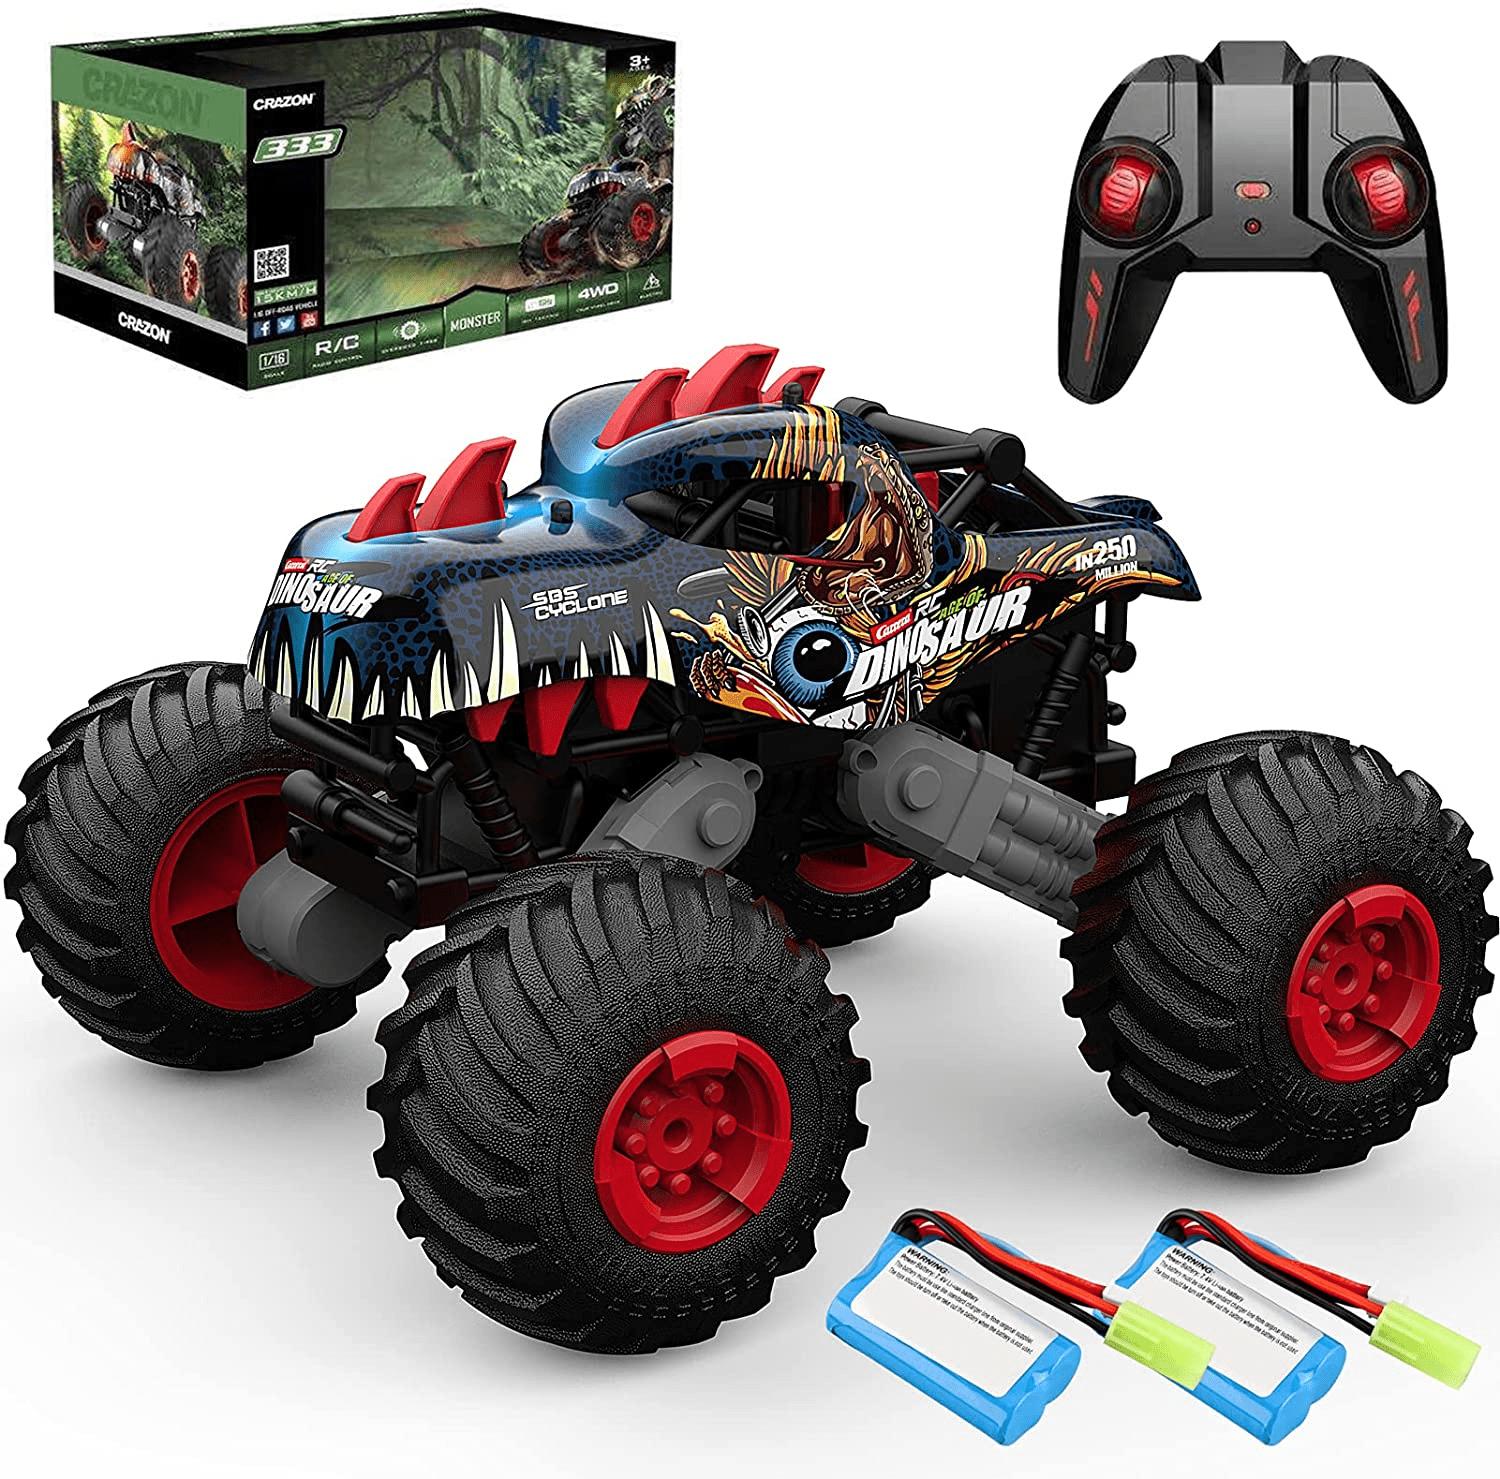 Monster Truck Remote Car: Compact Design and Durable Construction